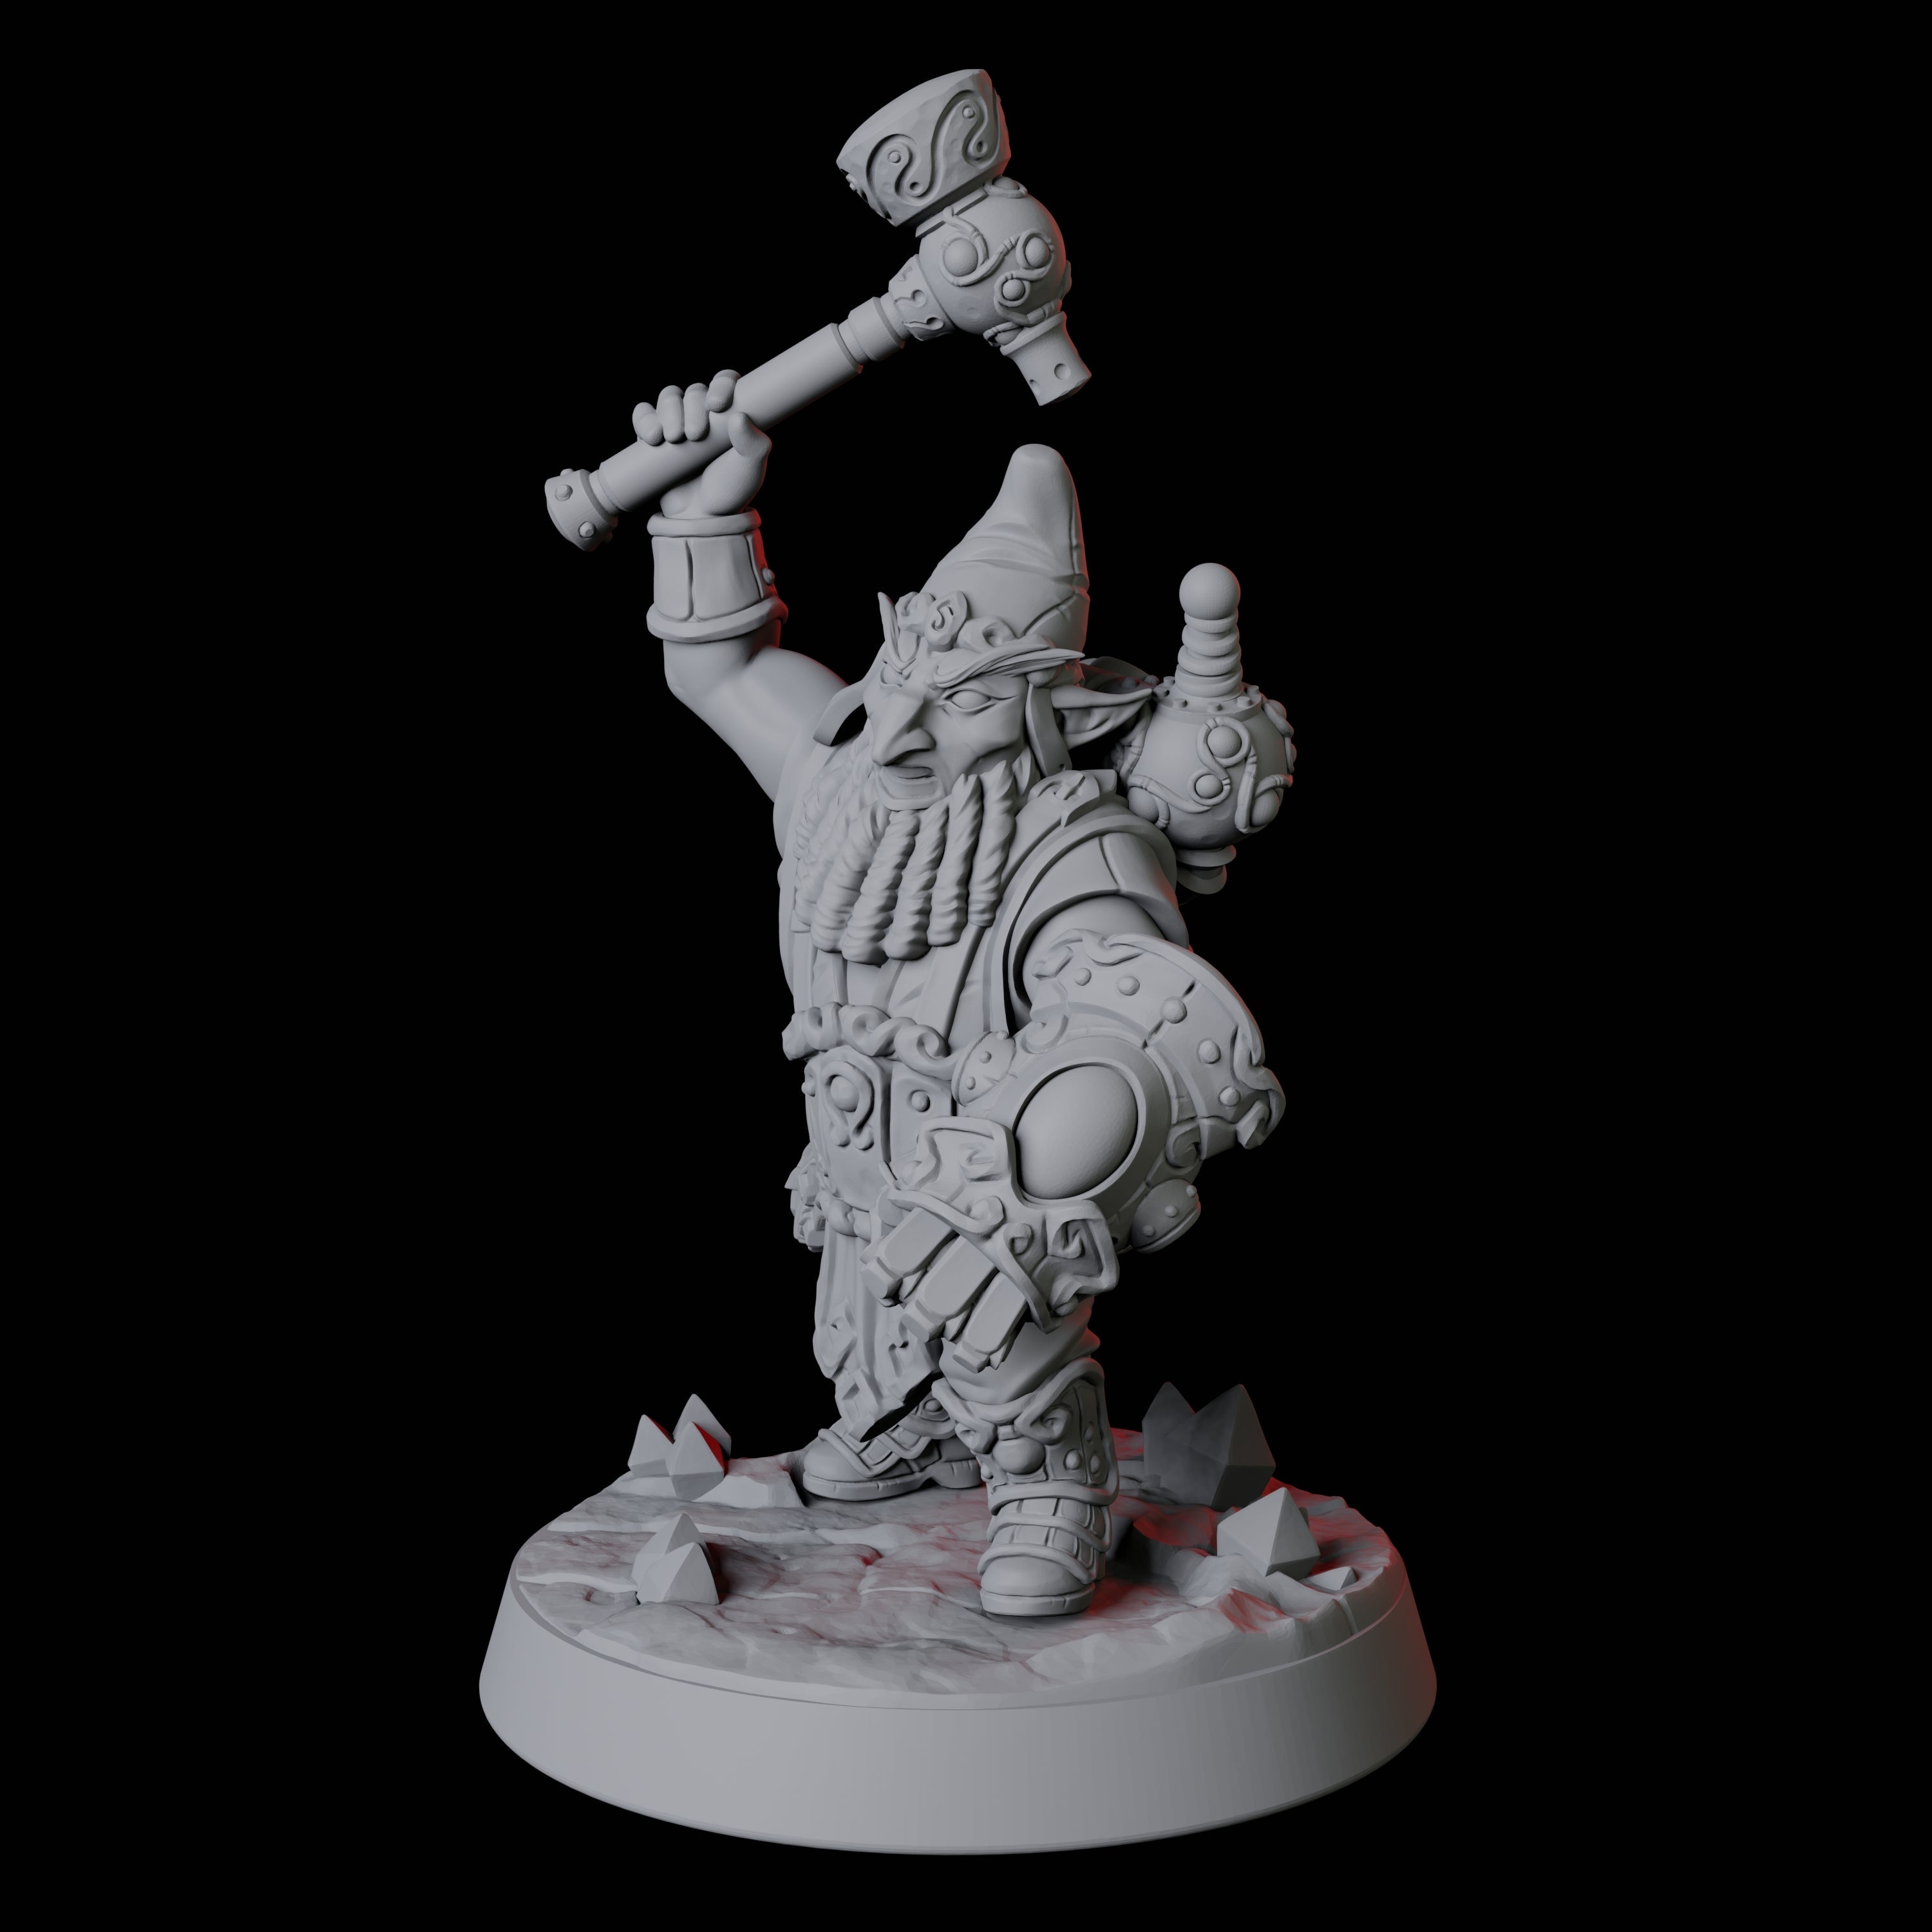 Deep Gnome Artificer C Miniature for Dungeons and Dragons, Pathfinder or other TTRPGs